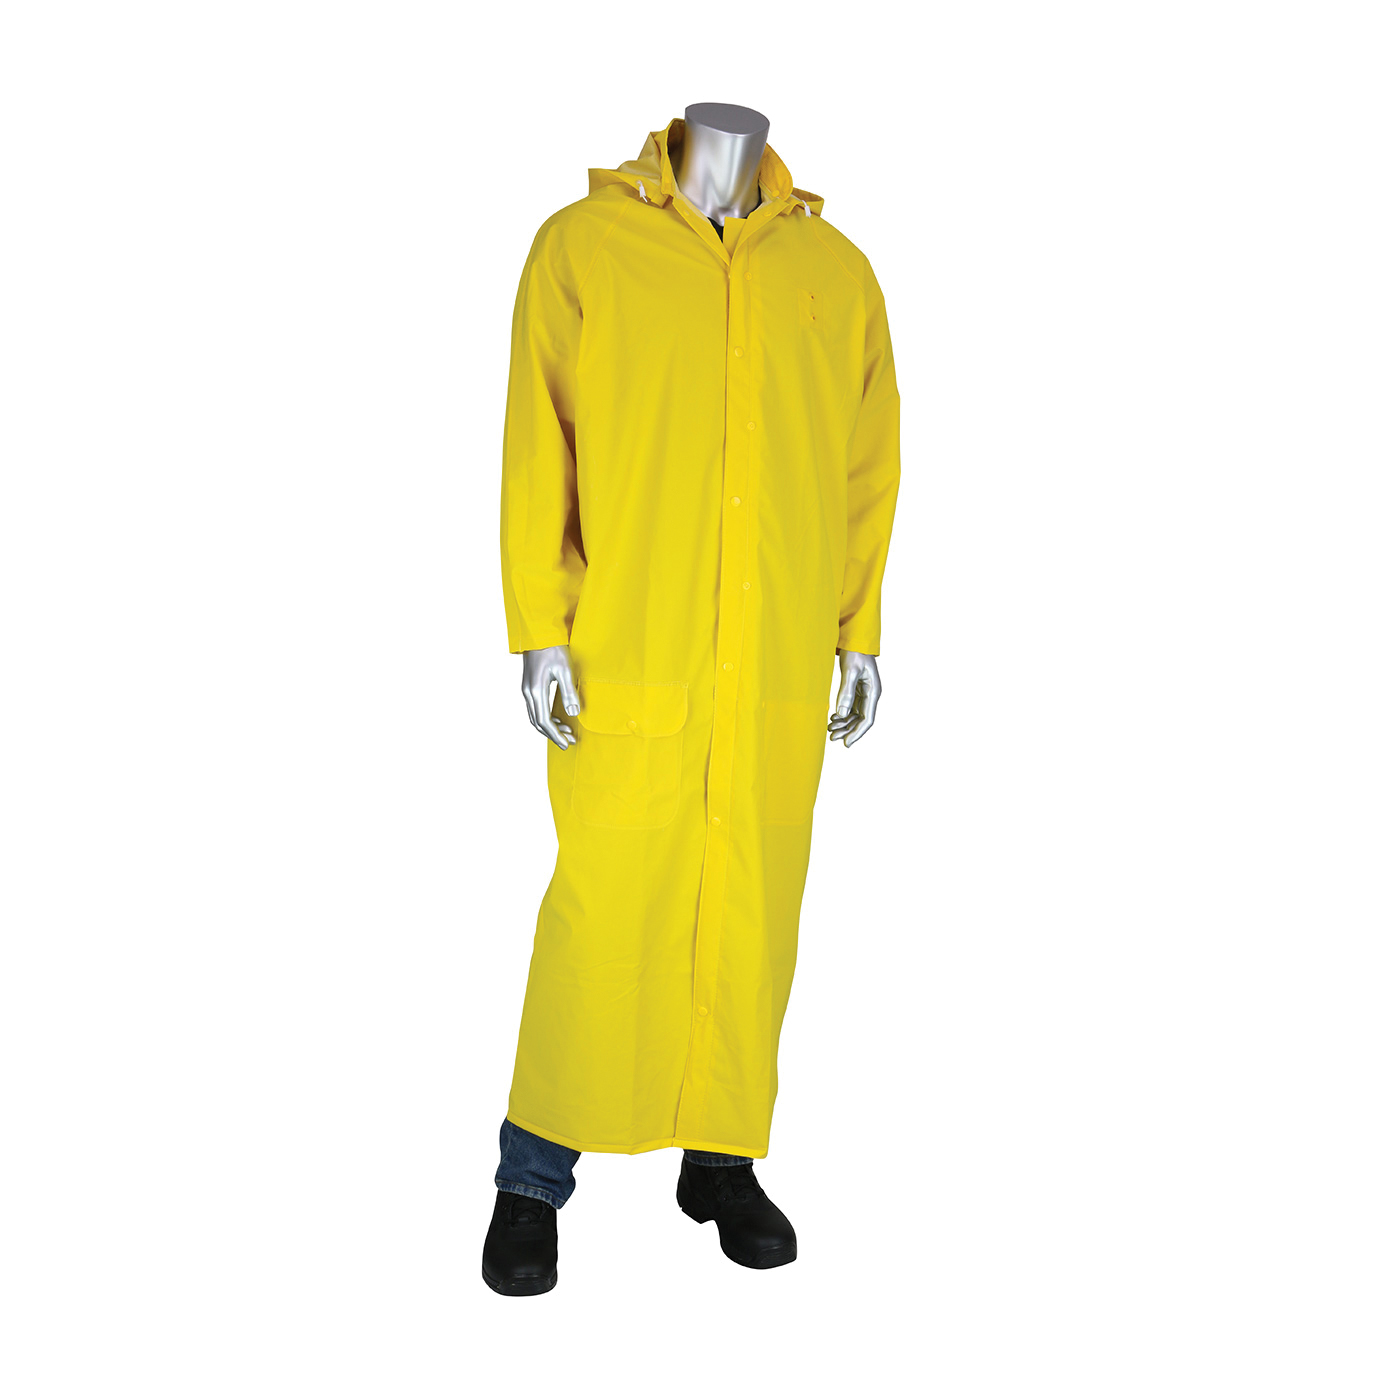 PIP® FALCON™ Base35FR™ 205-320FR/3X Premium Waterproof Duster Rain Coat With Limited Flammability, Unisex, 3XL, Yellow, Corduroy/Polyester/PVC, Resists: Flame and Water, Specifications Met: ASTM D6413